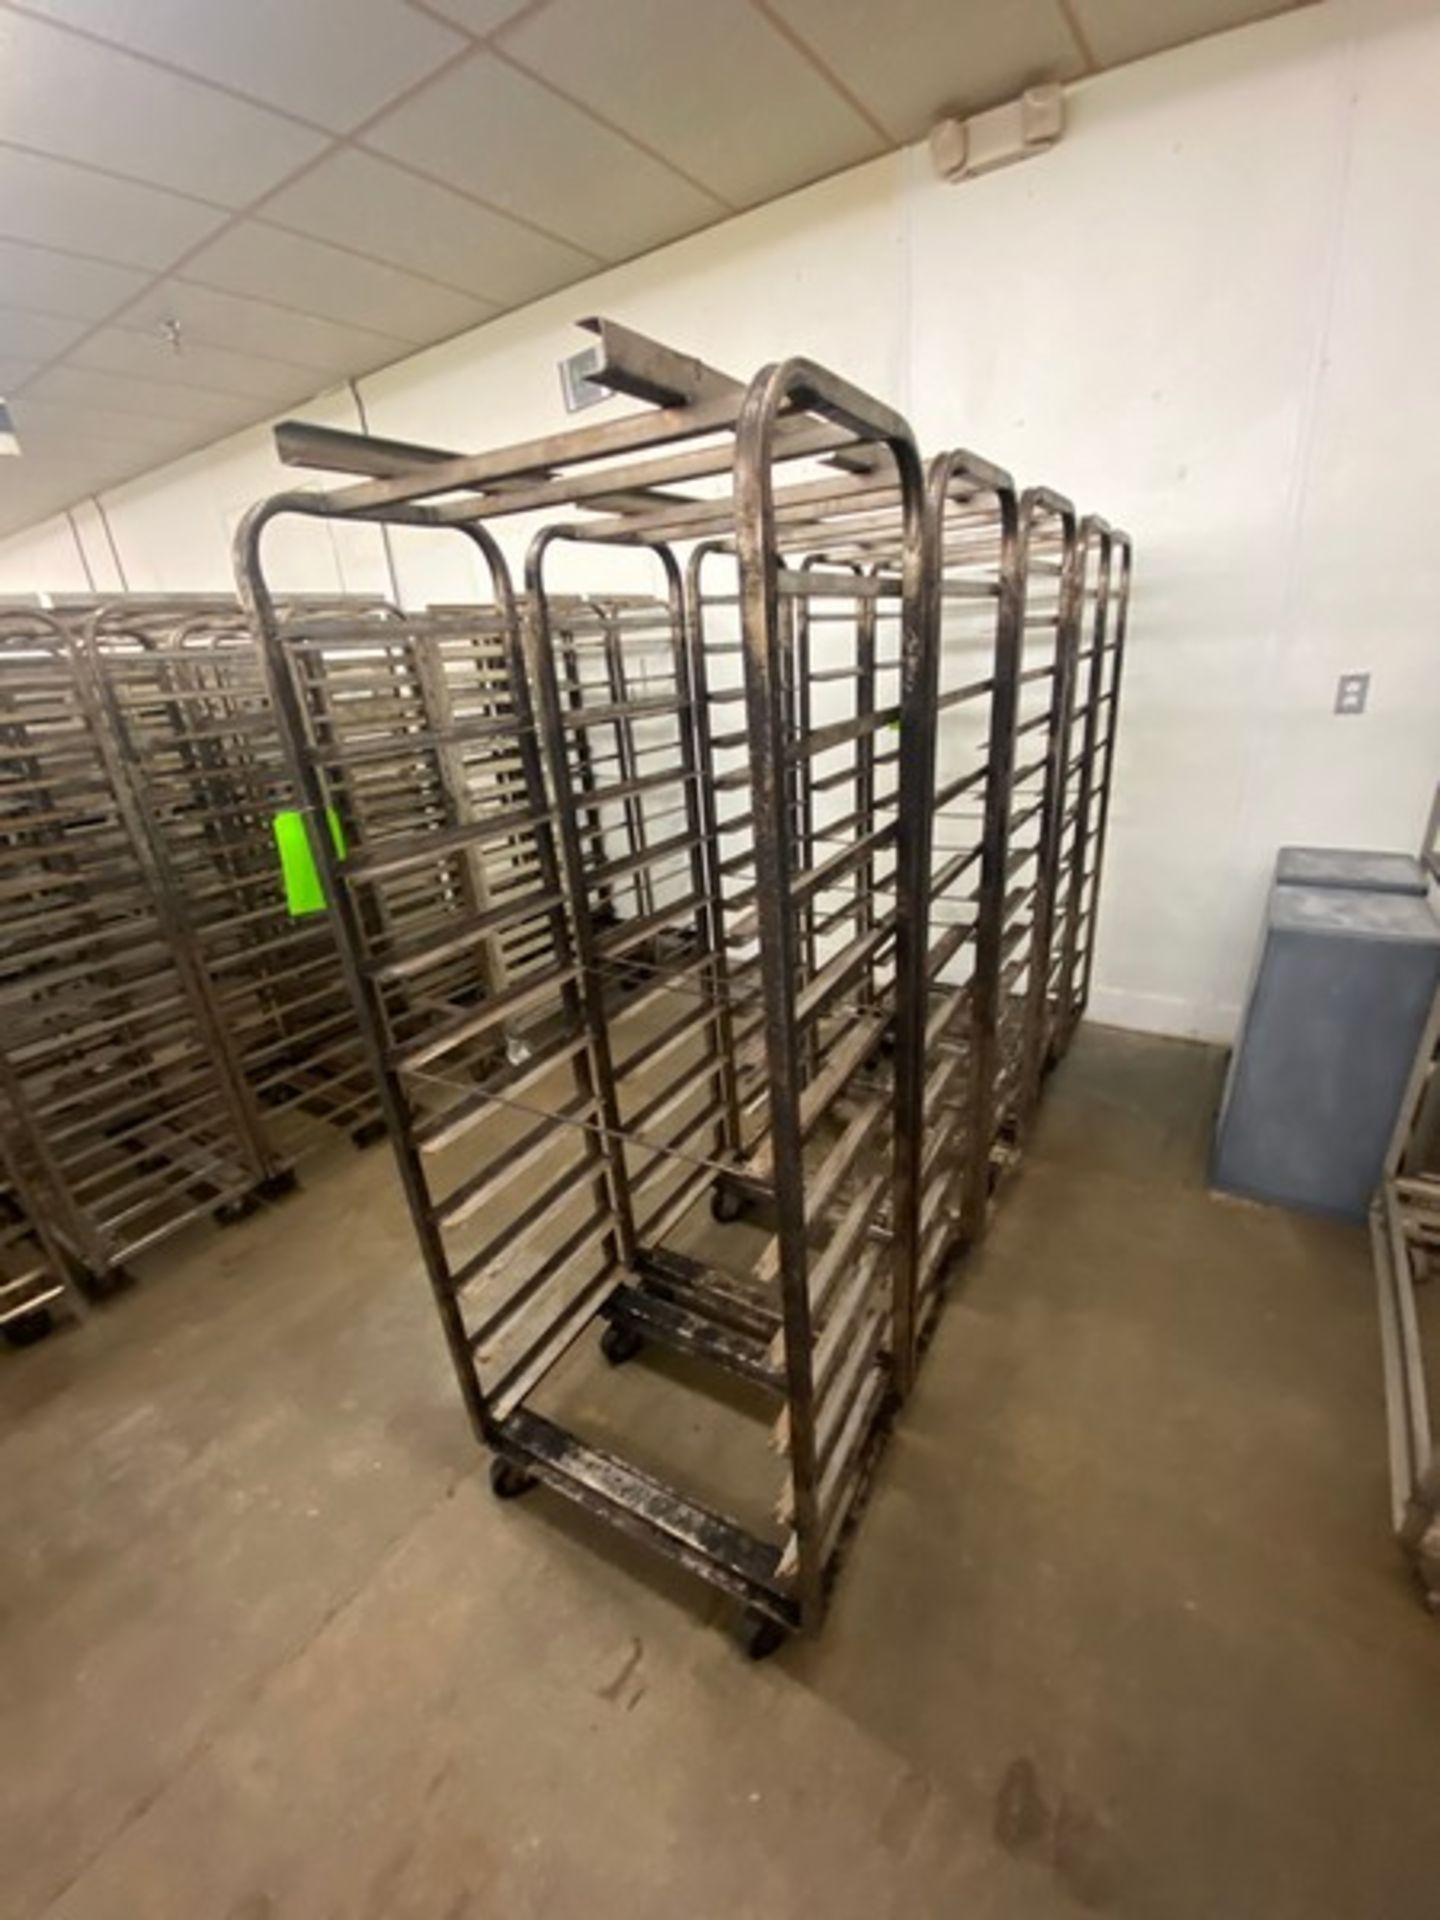 (5) PORTABLE BAKING PAN RACKS, MOUNTED ON CASTERS (LOCATED IN HERMITAGE, PA) - Image 2 of 2